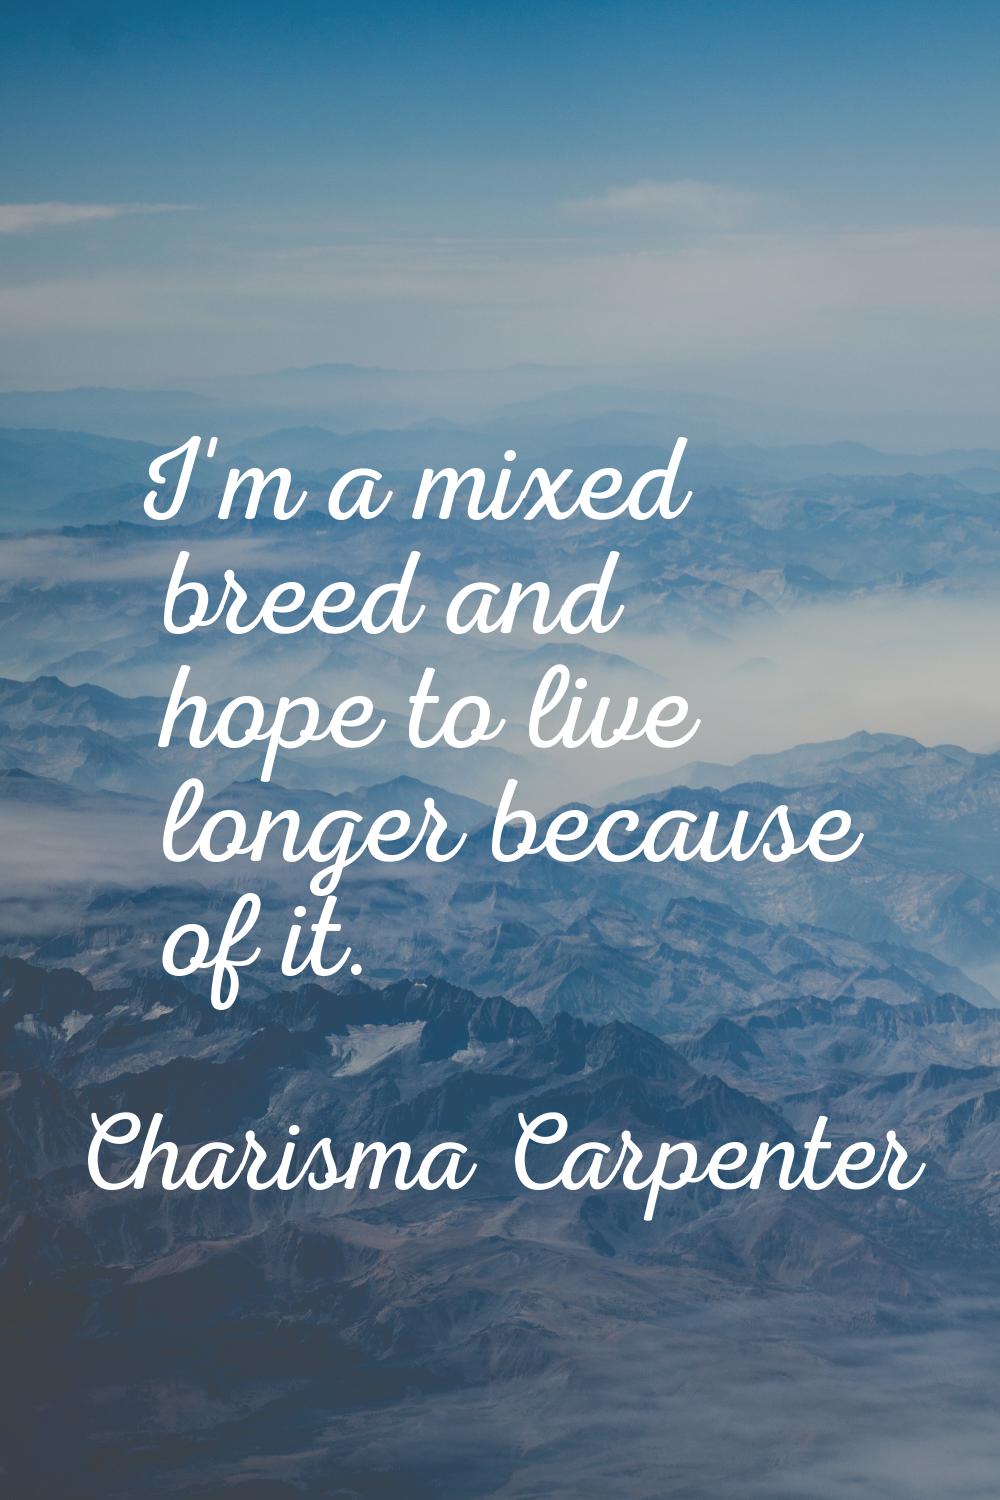 I'm a mixed breed and hope to live longer because of it.